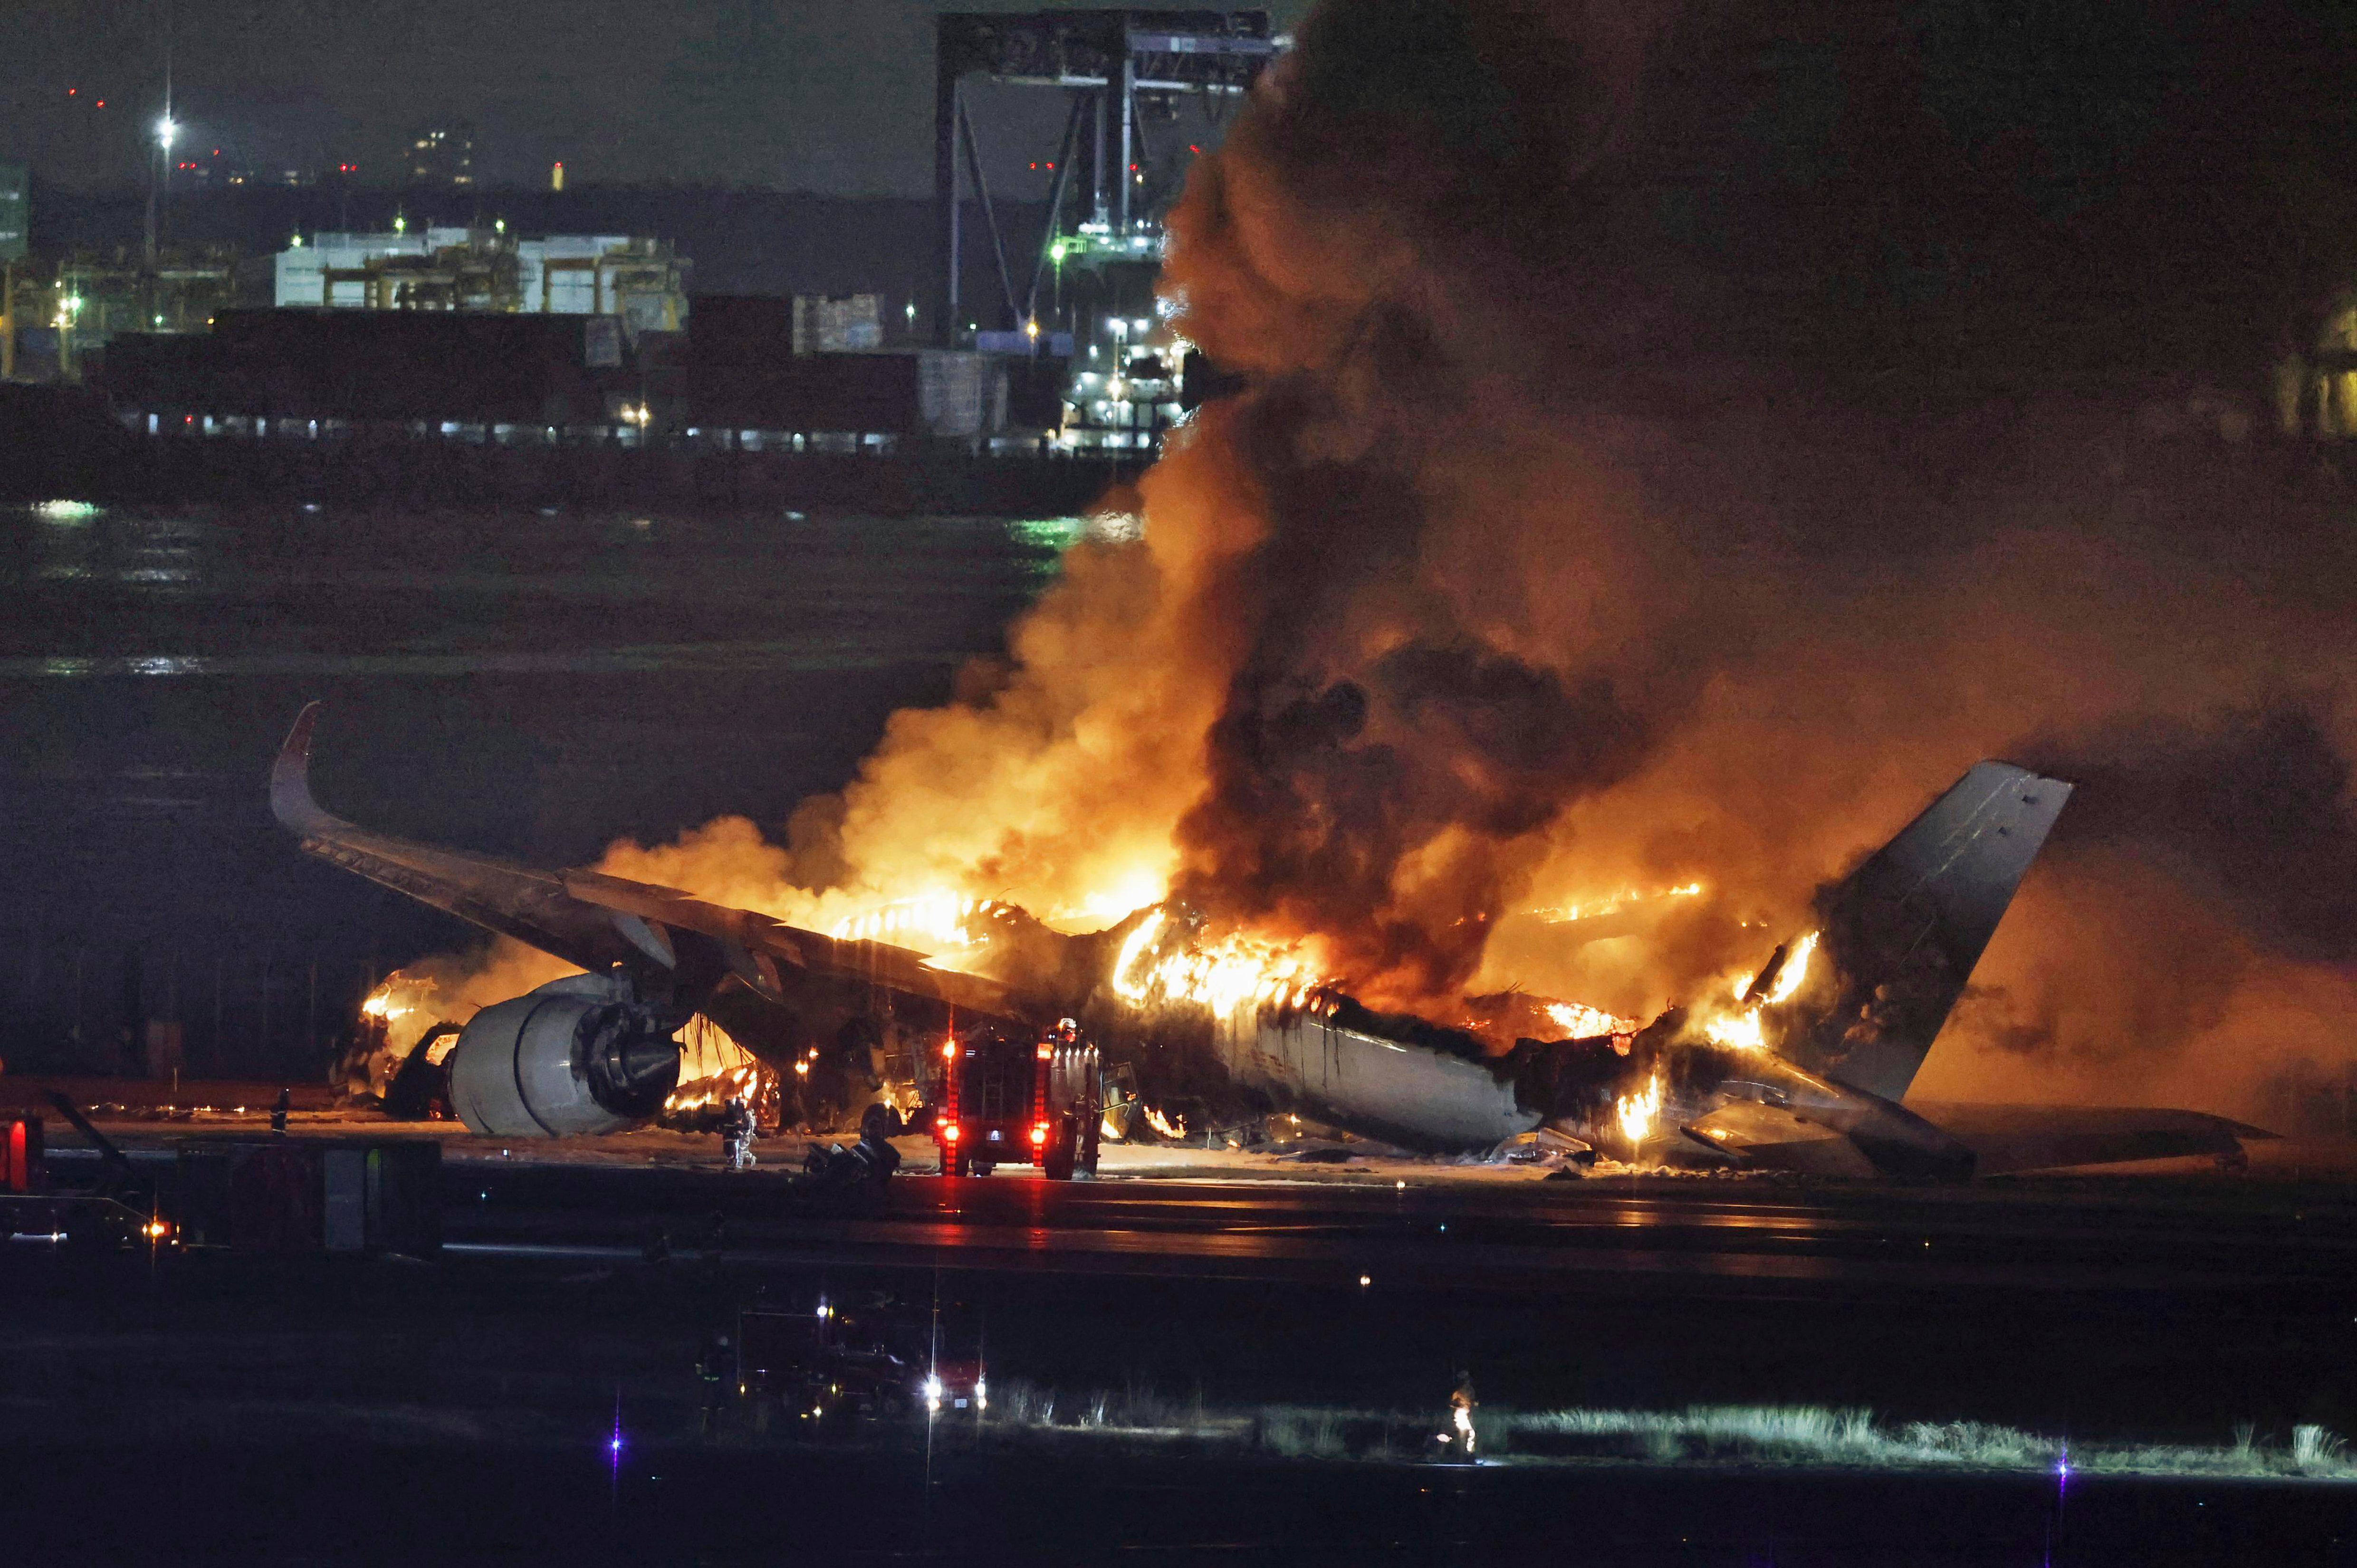 The Japan Airlines Airbus A350 in flames at Tokyo’s main airport, Haneda, after striking a Dash-8 propeller plane that had strayed onto the runway